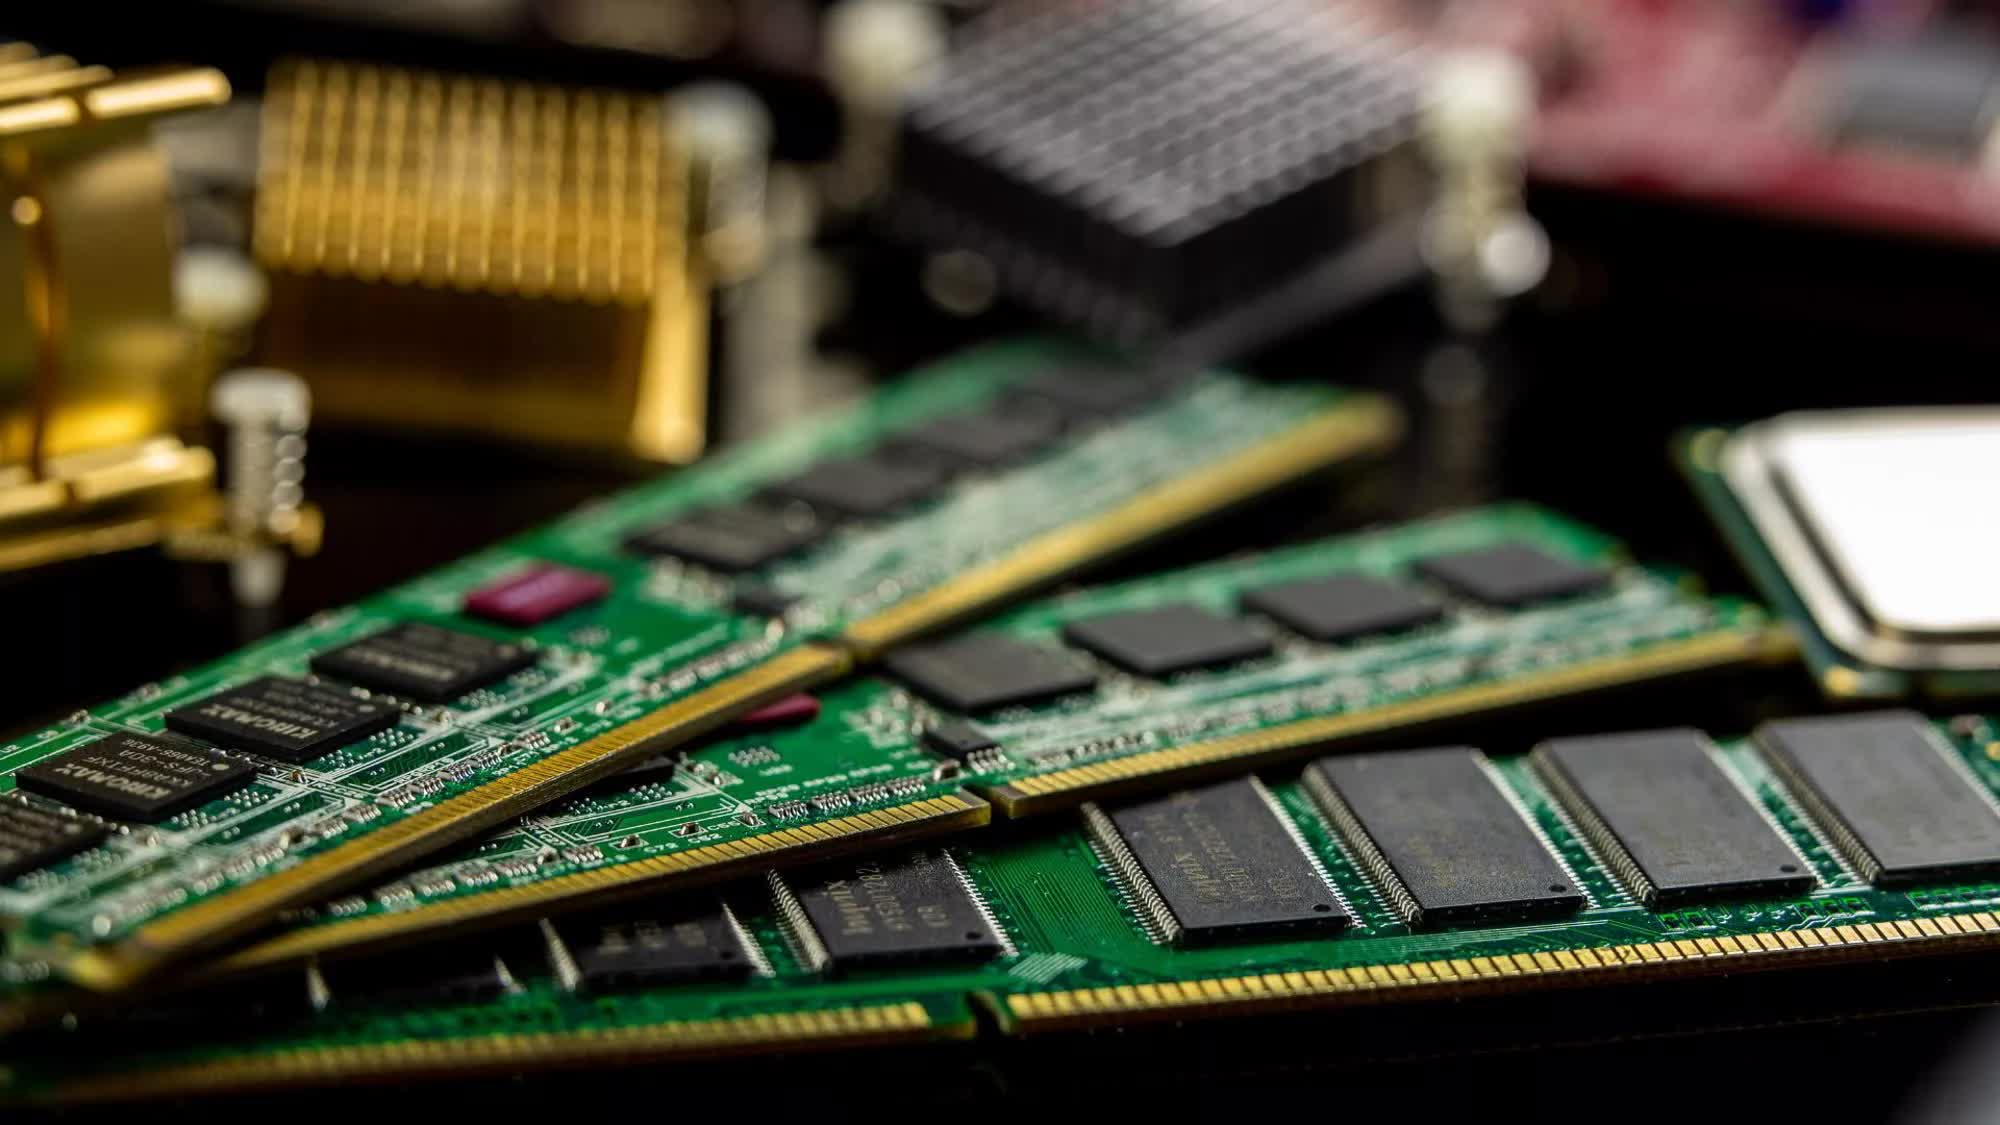 3D DRAM is coming, but we don't know how to build it - yet